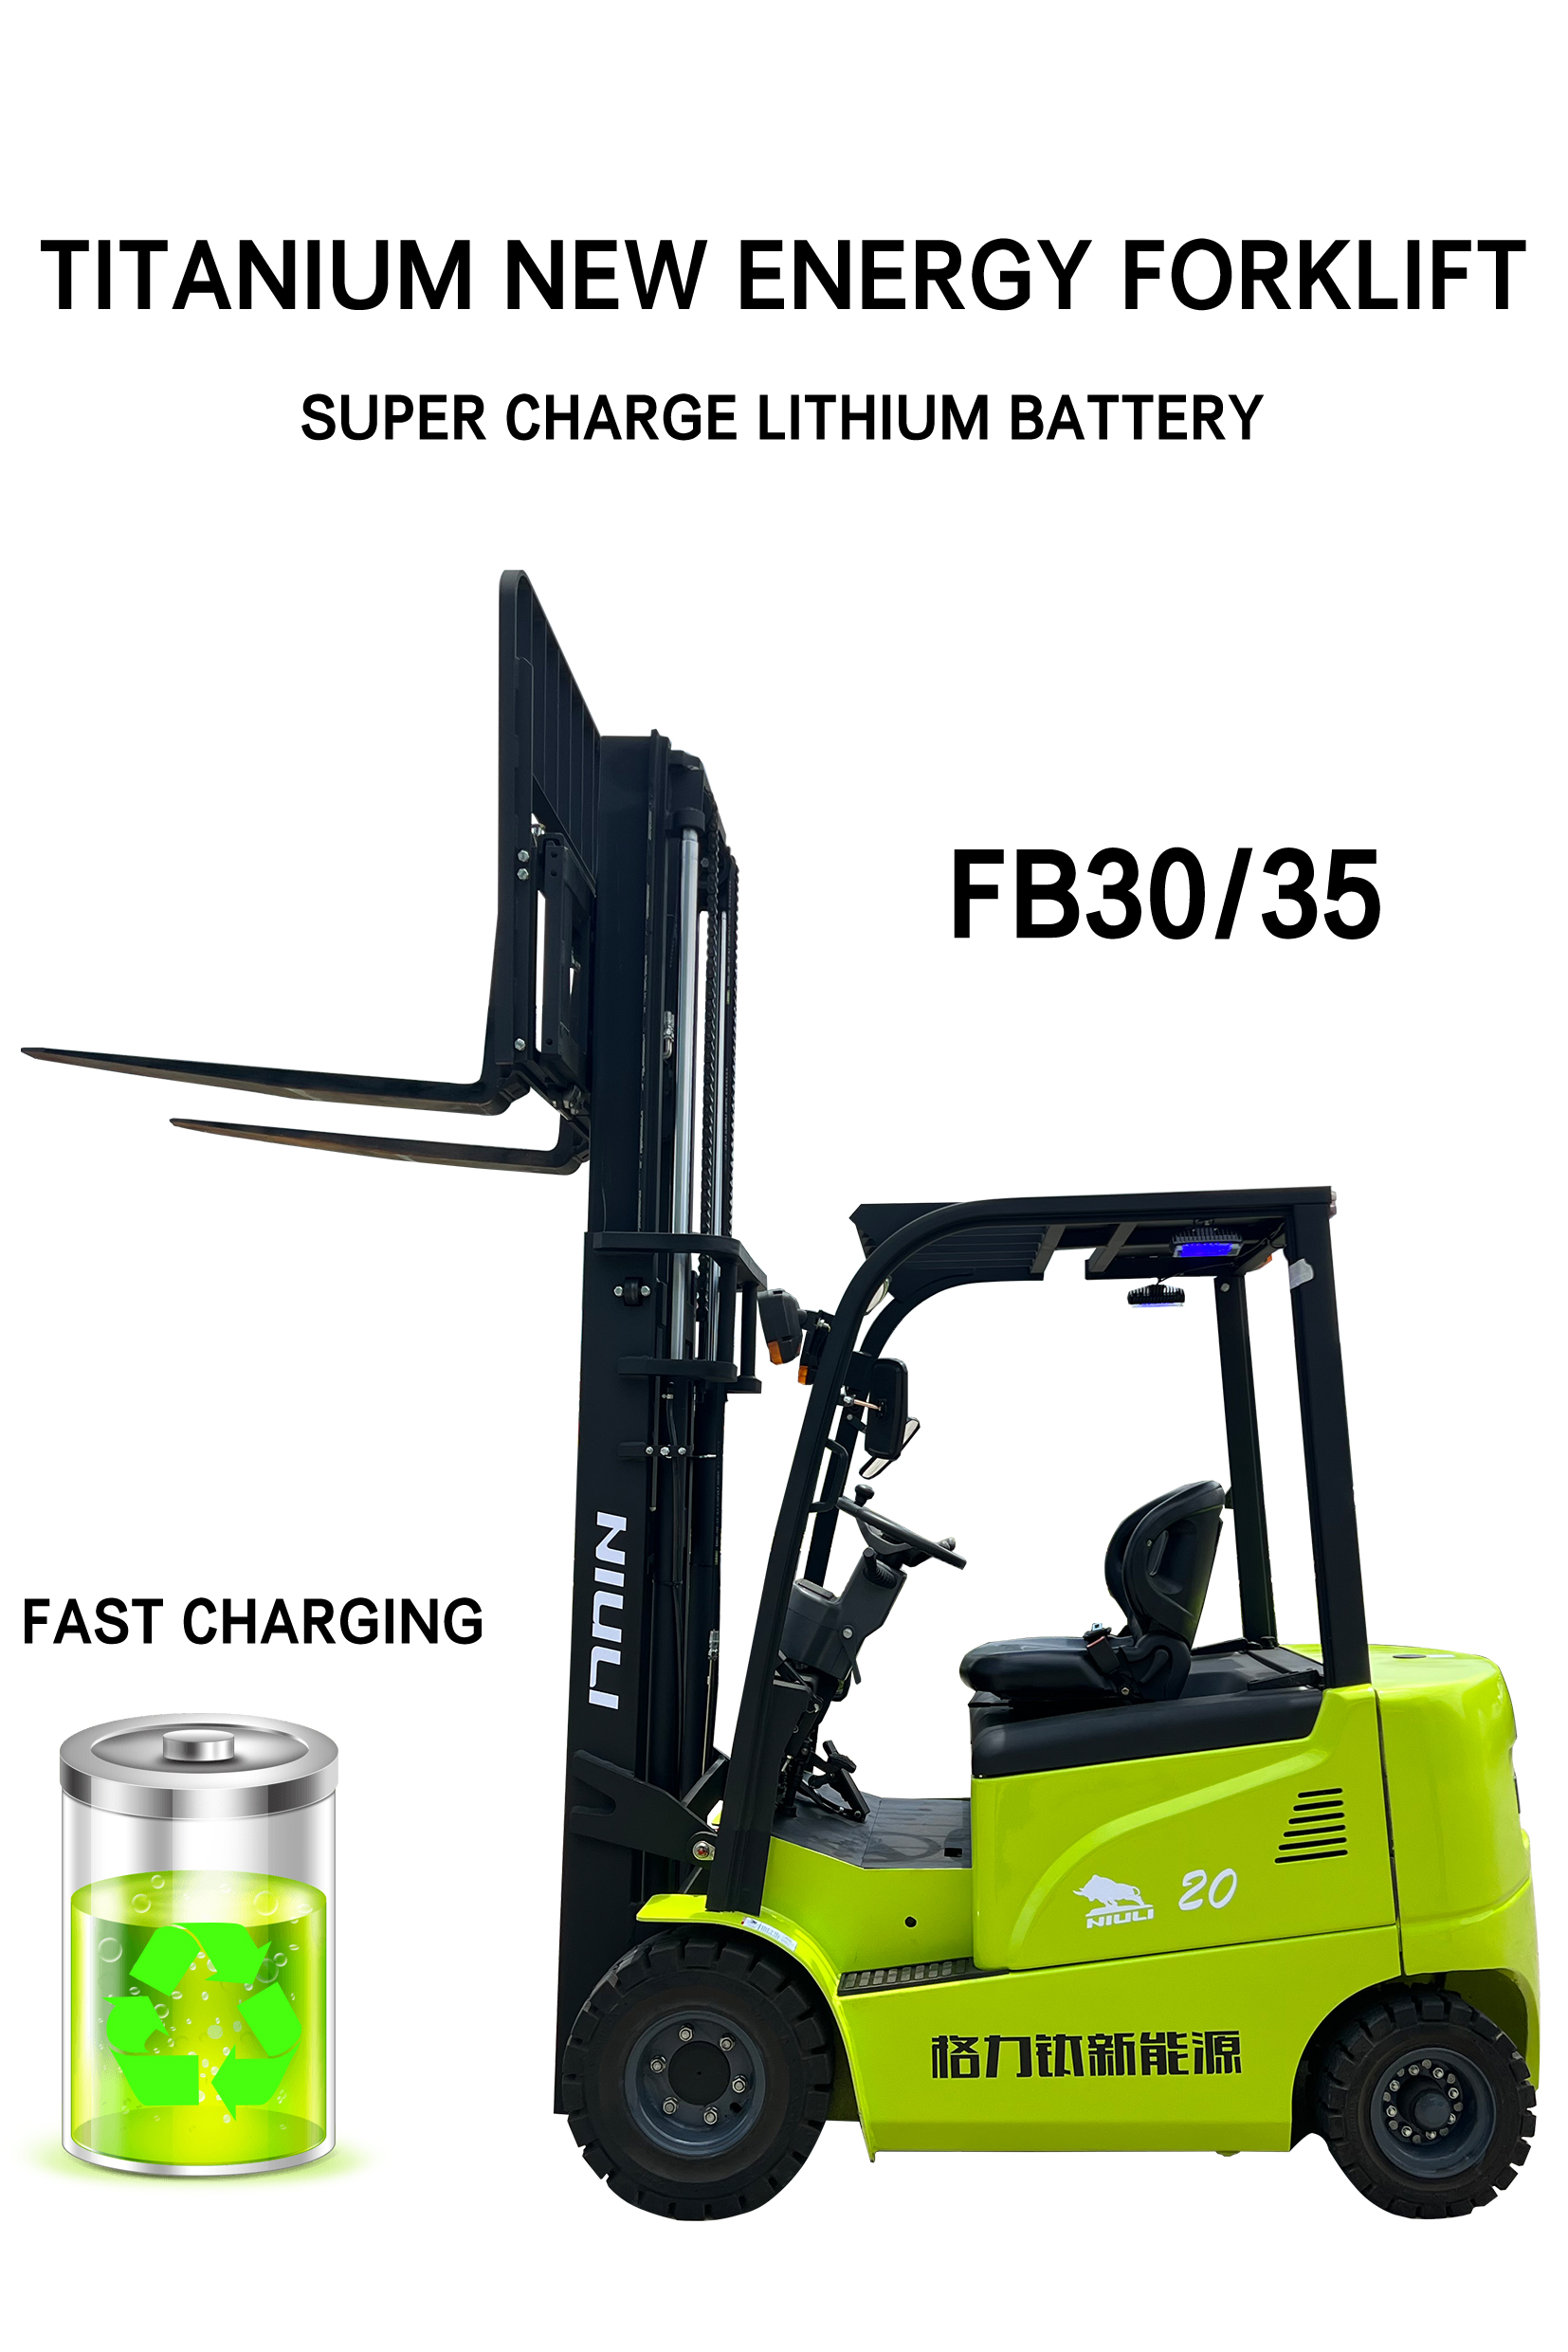 Advantages of an Electric Forklift